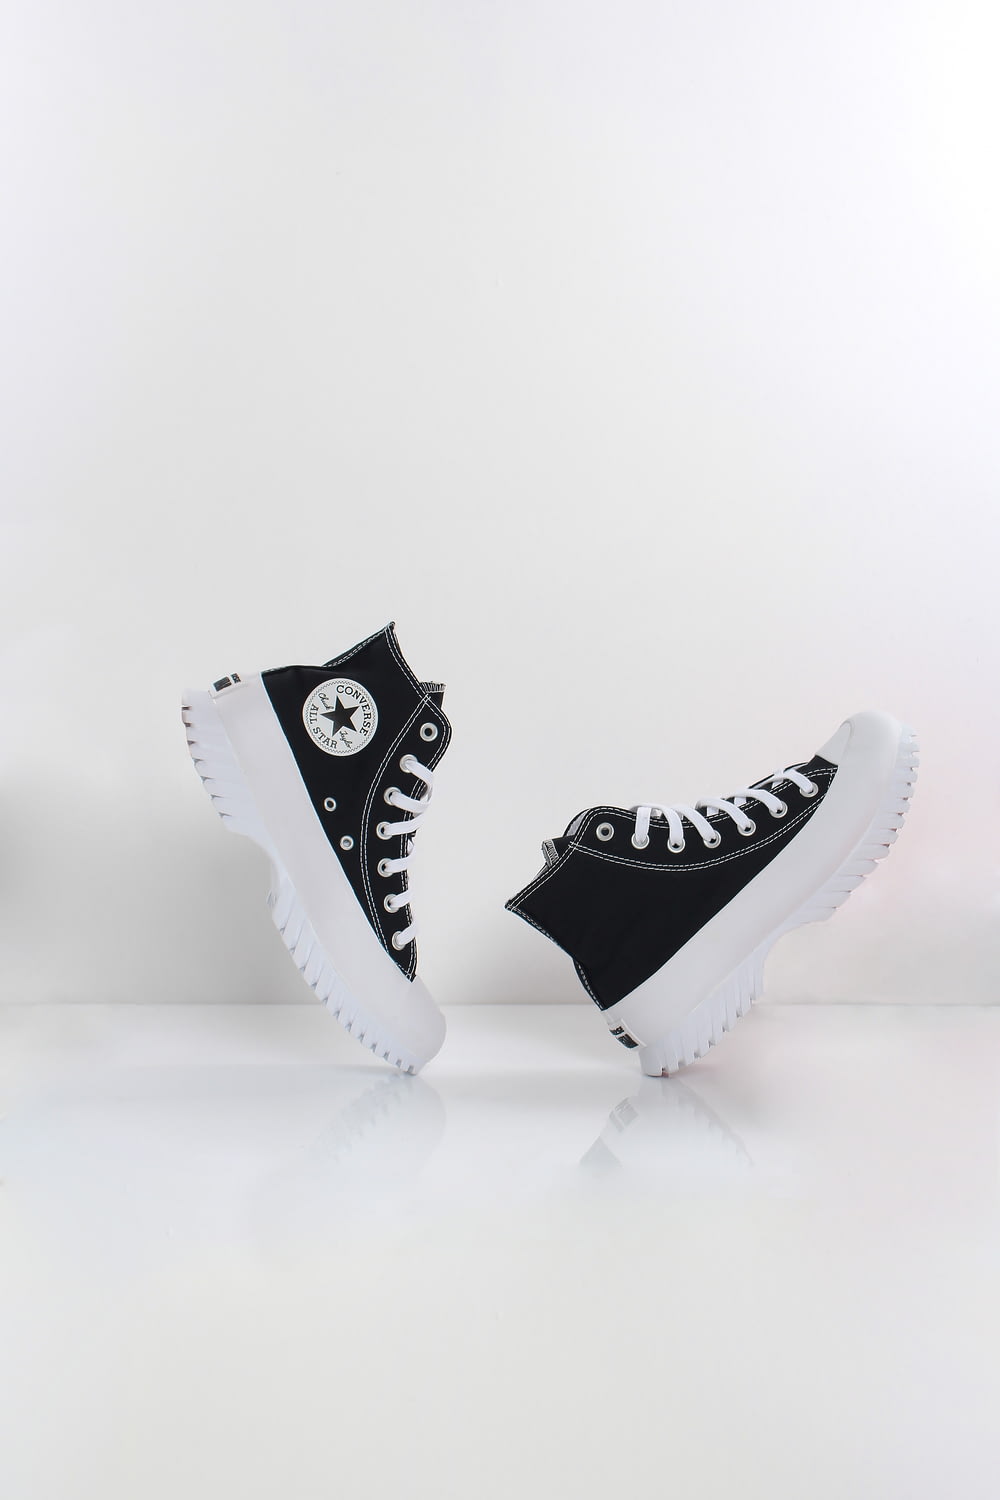 a pair of black and white converse sneakers